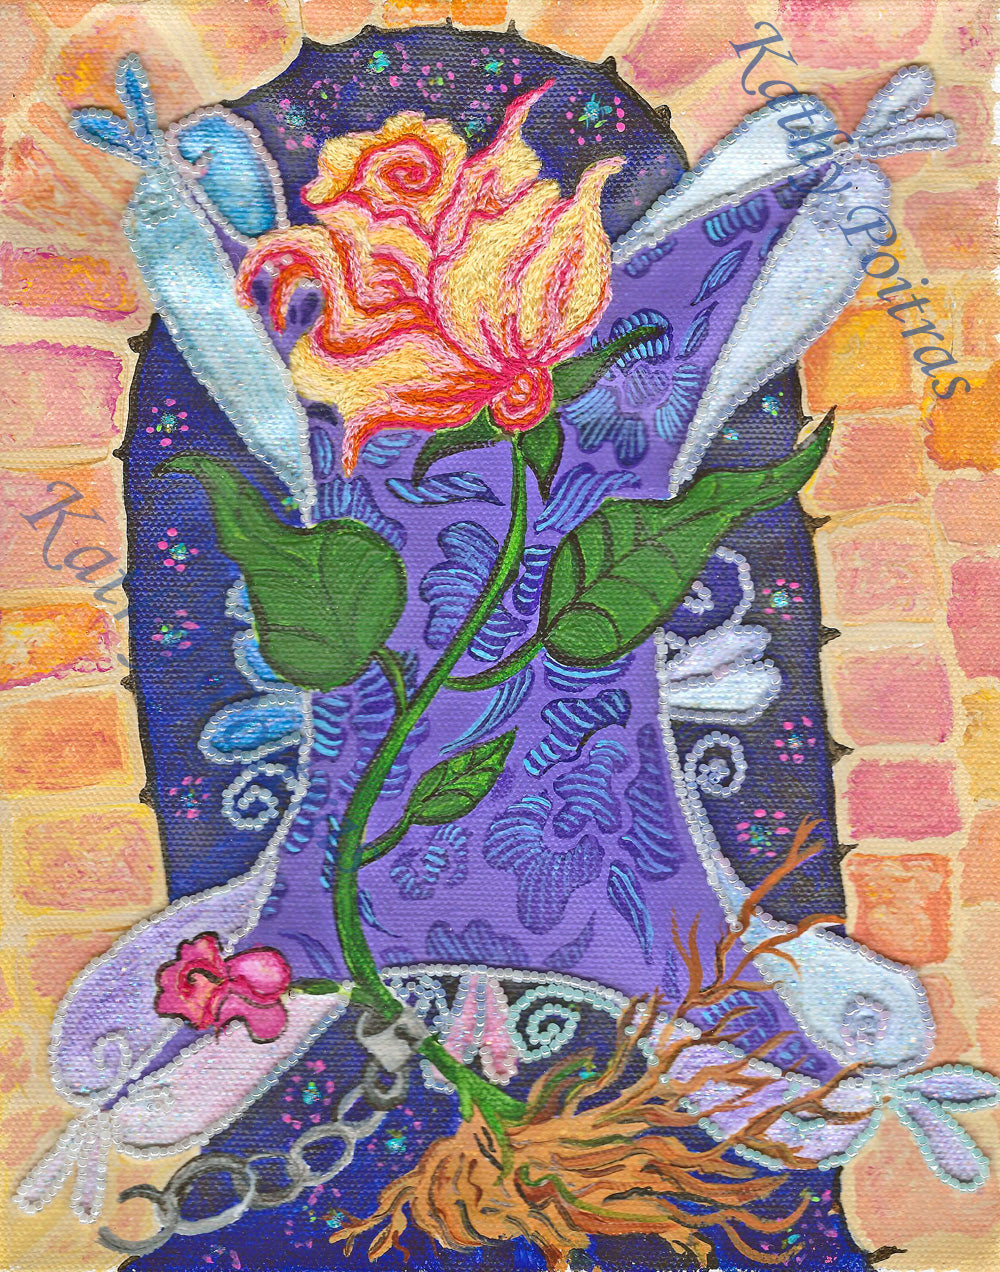 Birthday Art Card of Freedom Rose For Dad.